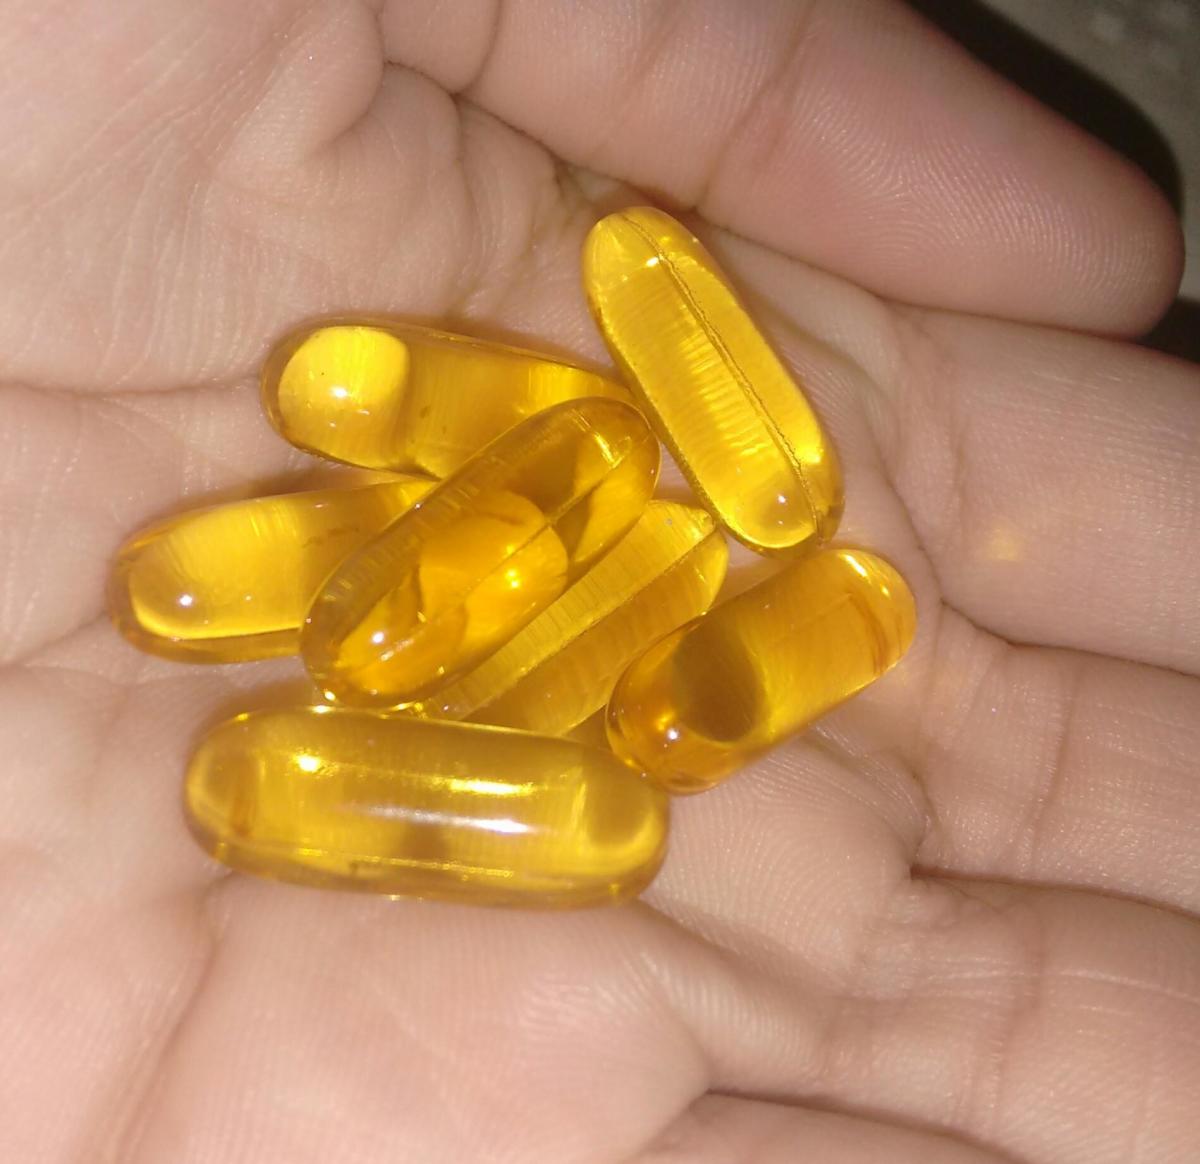 You should never take Omega 3 fish oil supplements with CBD oil